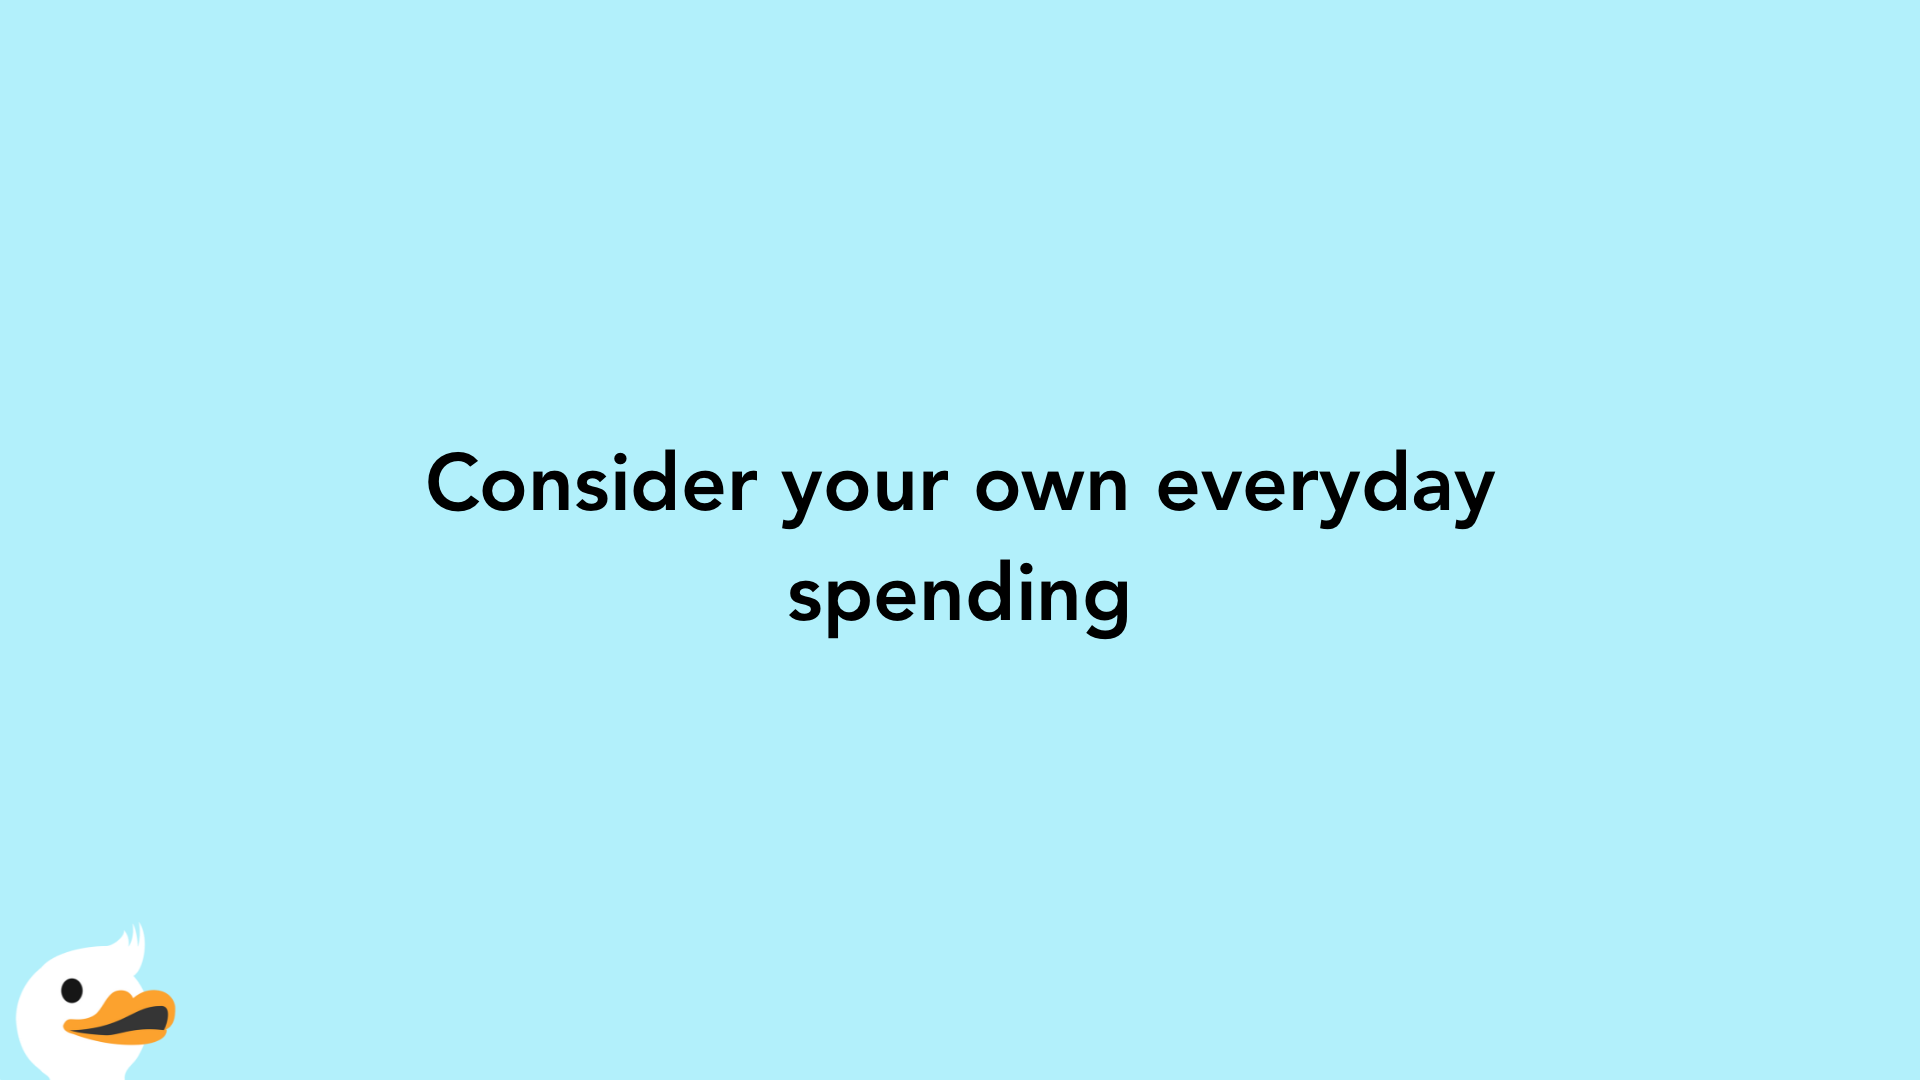 Consider your own everyday spending